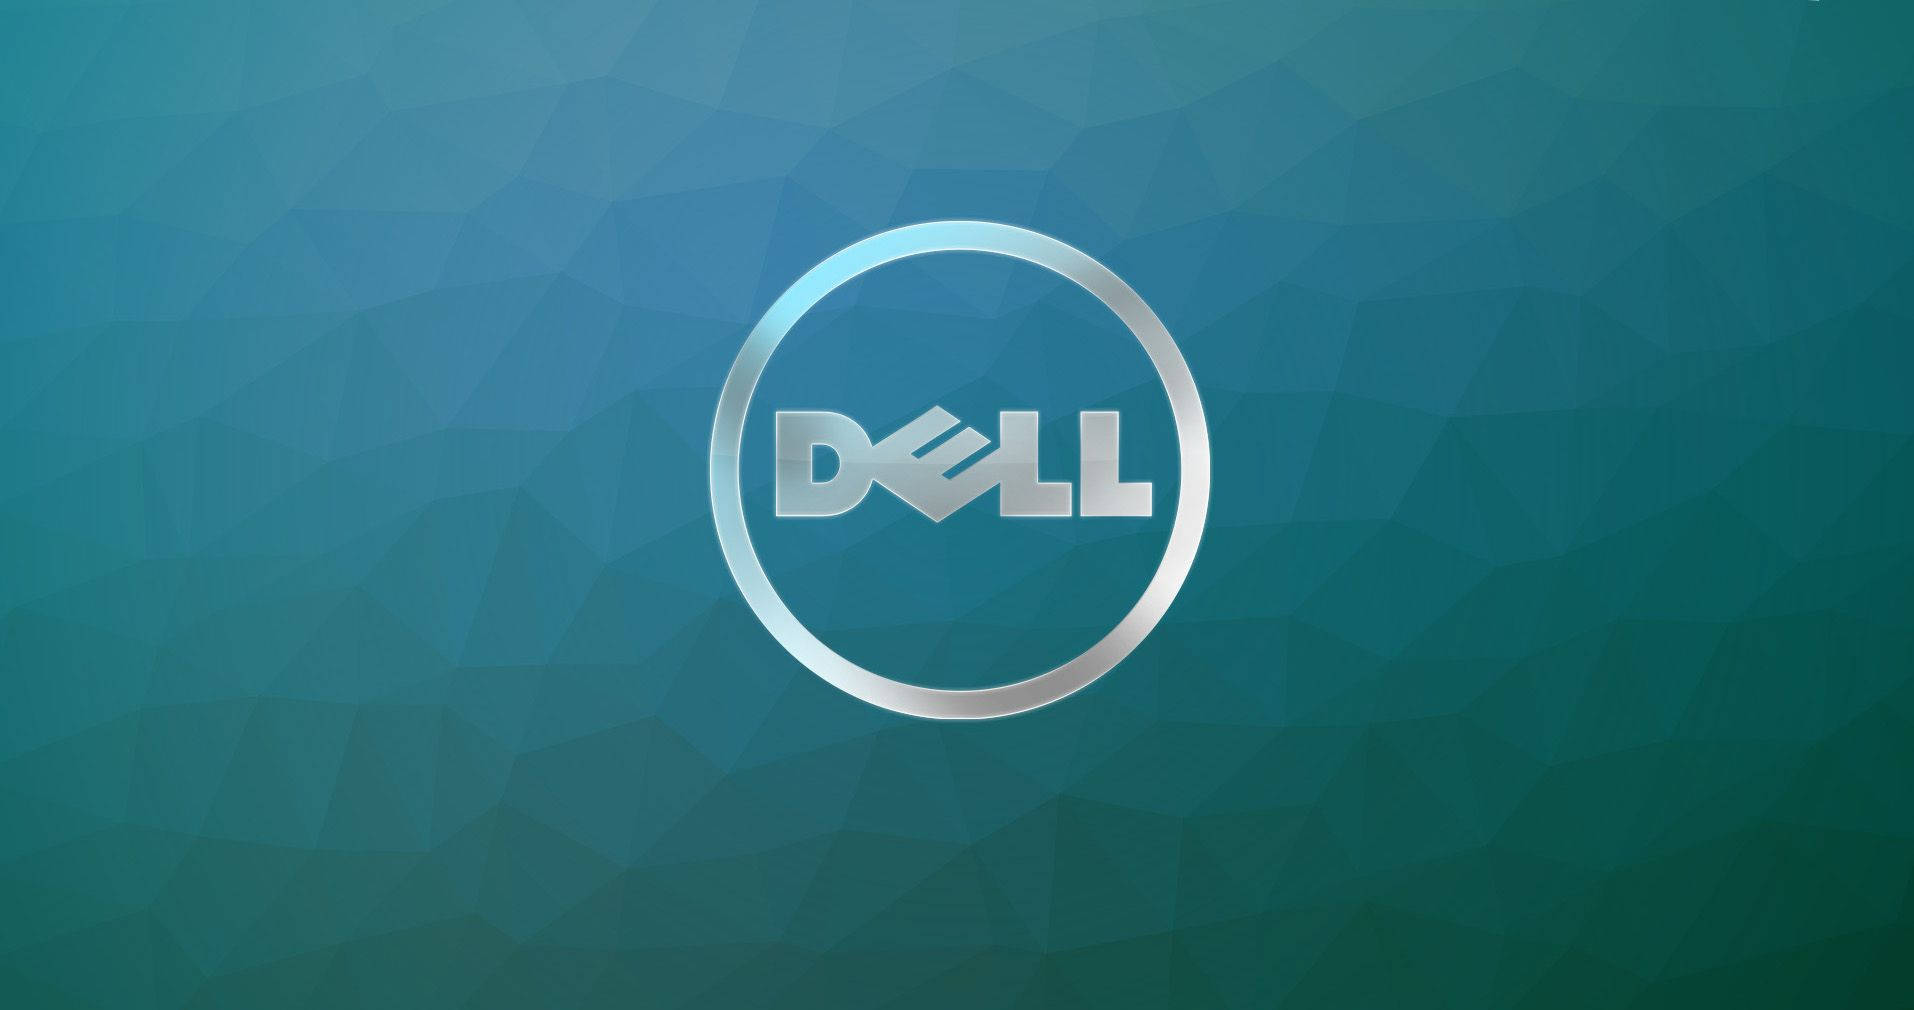 Dell 1914X1010 Wallpaper and Background Image